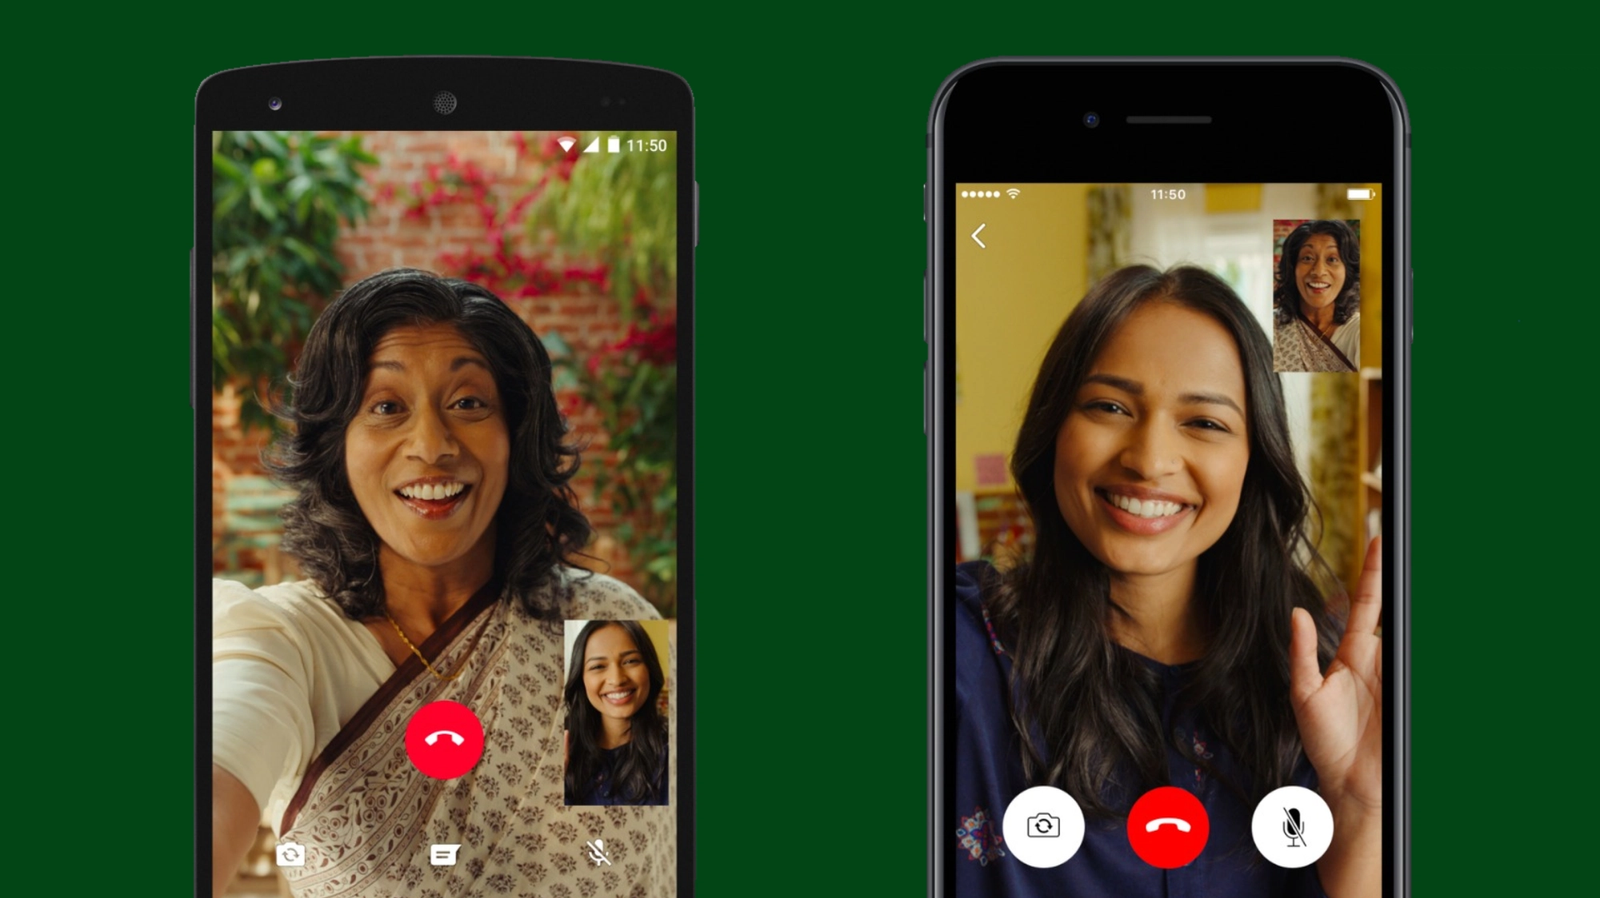 How To Share Screen In WhatsApp Video Call On Android, iOS And PC